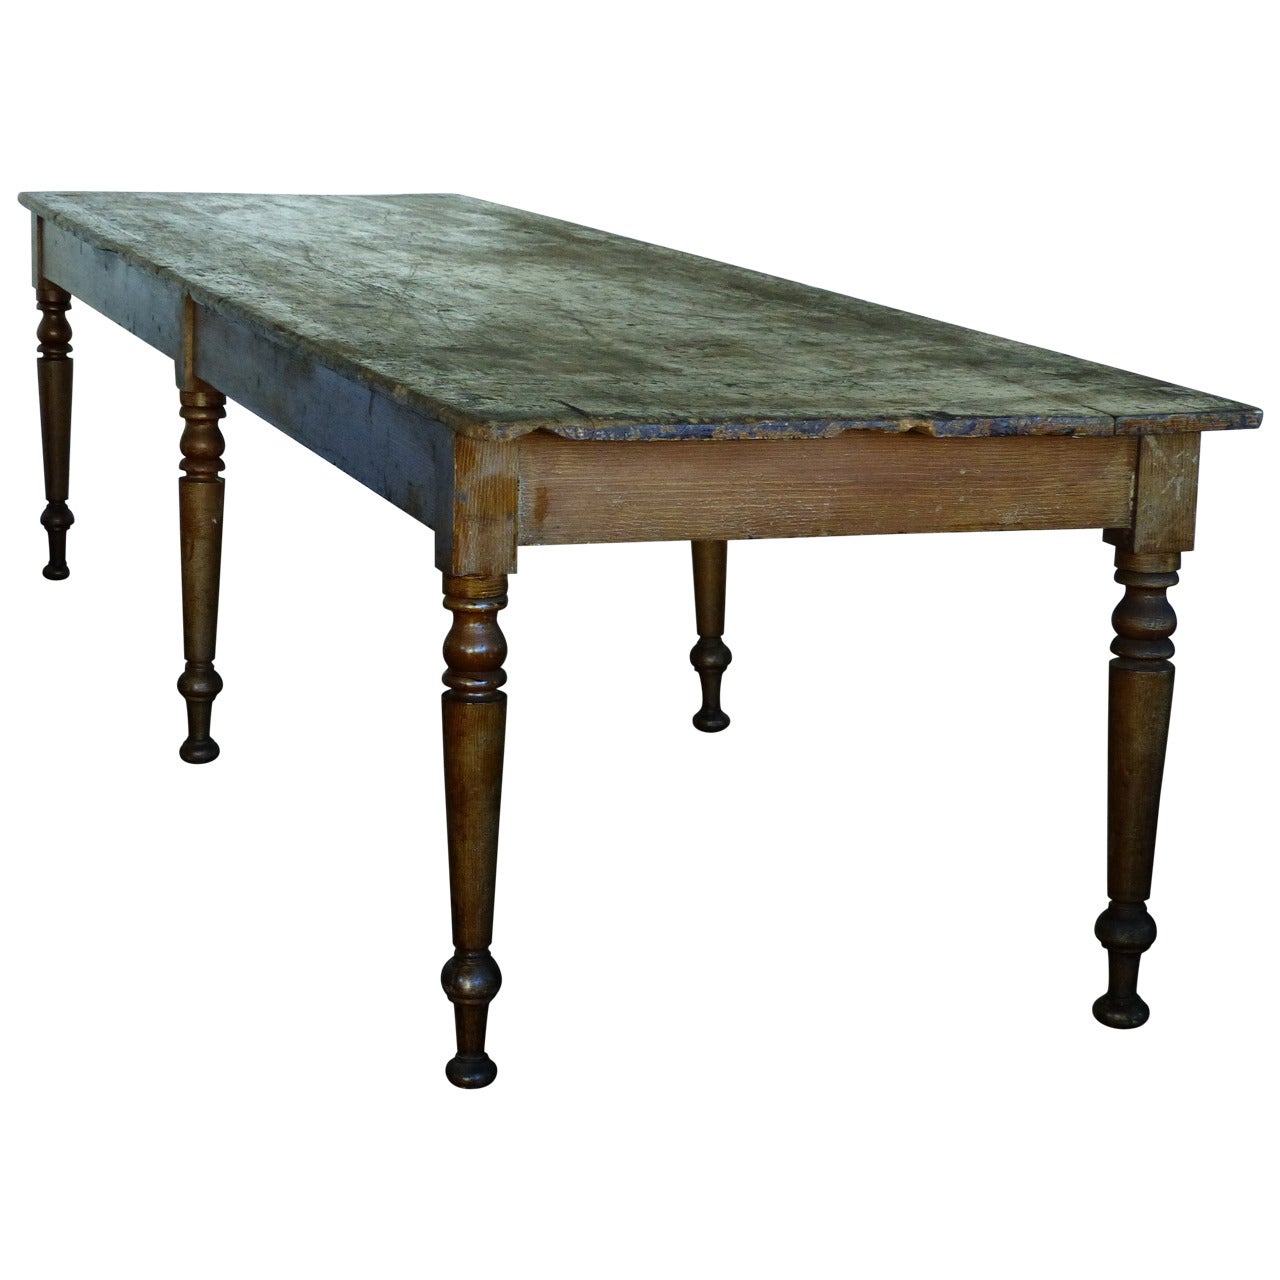 19th c 10 ft Convent table